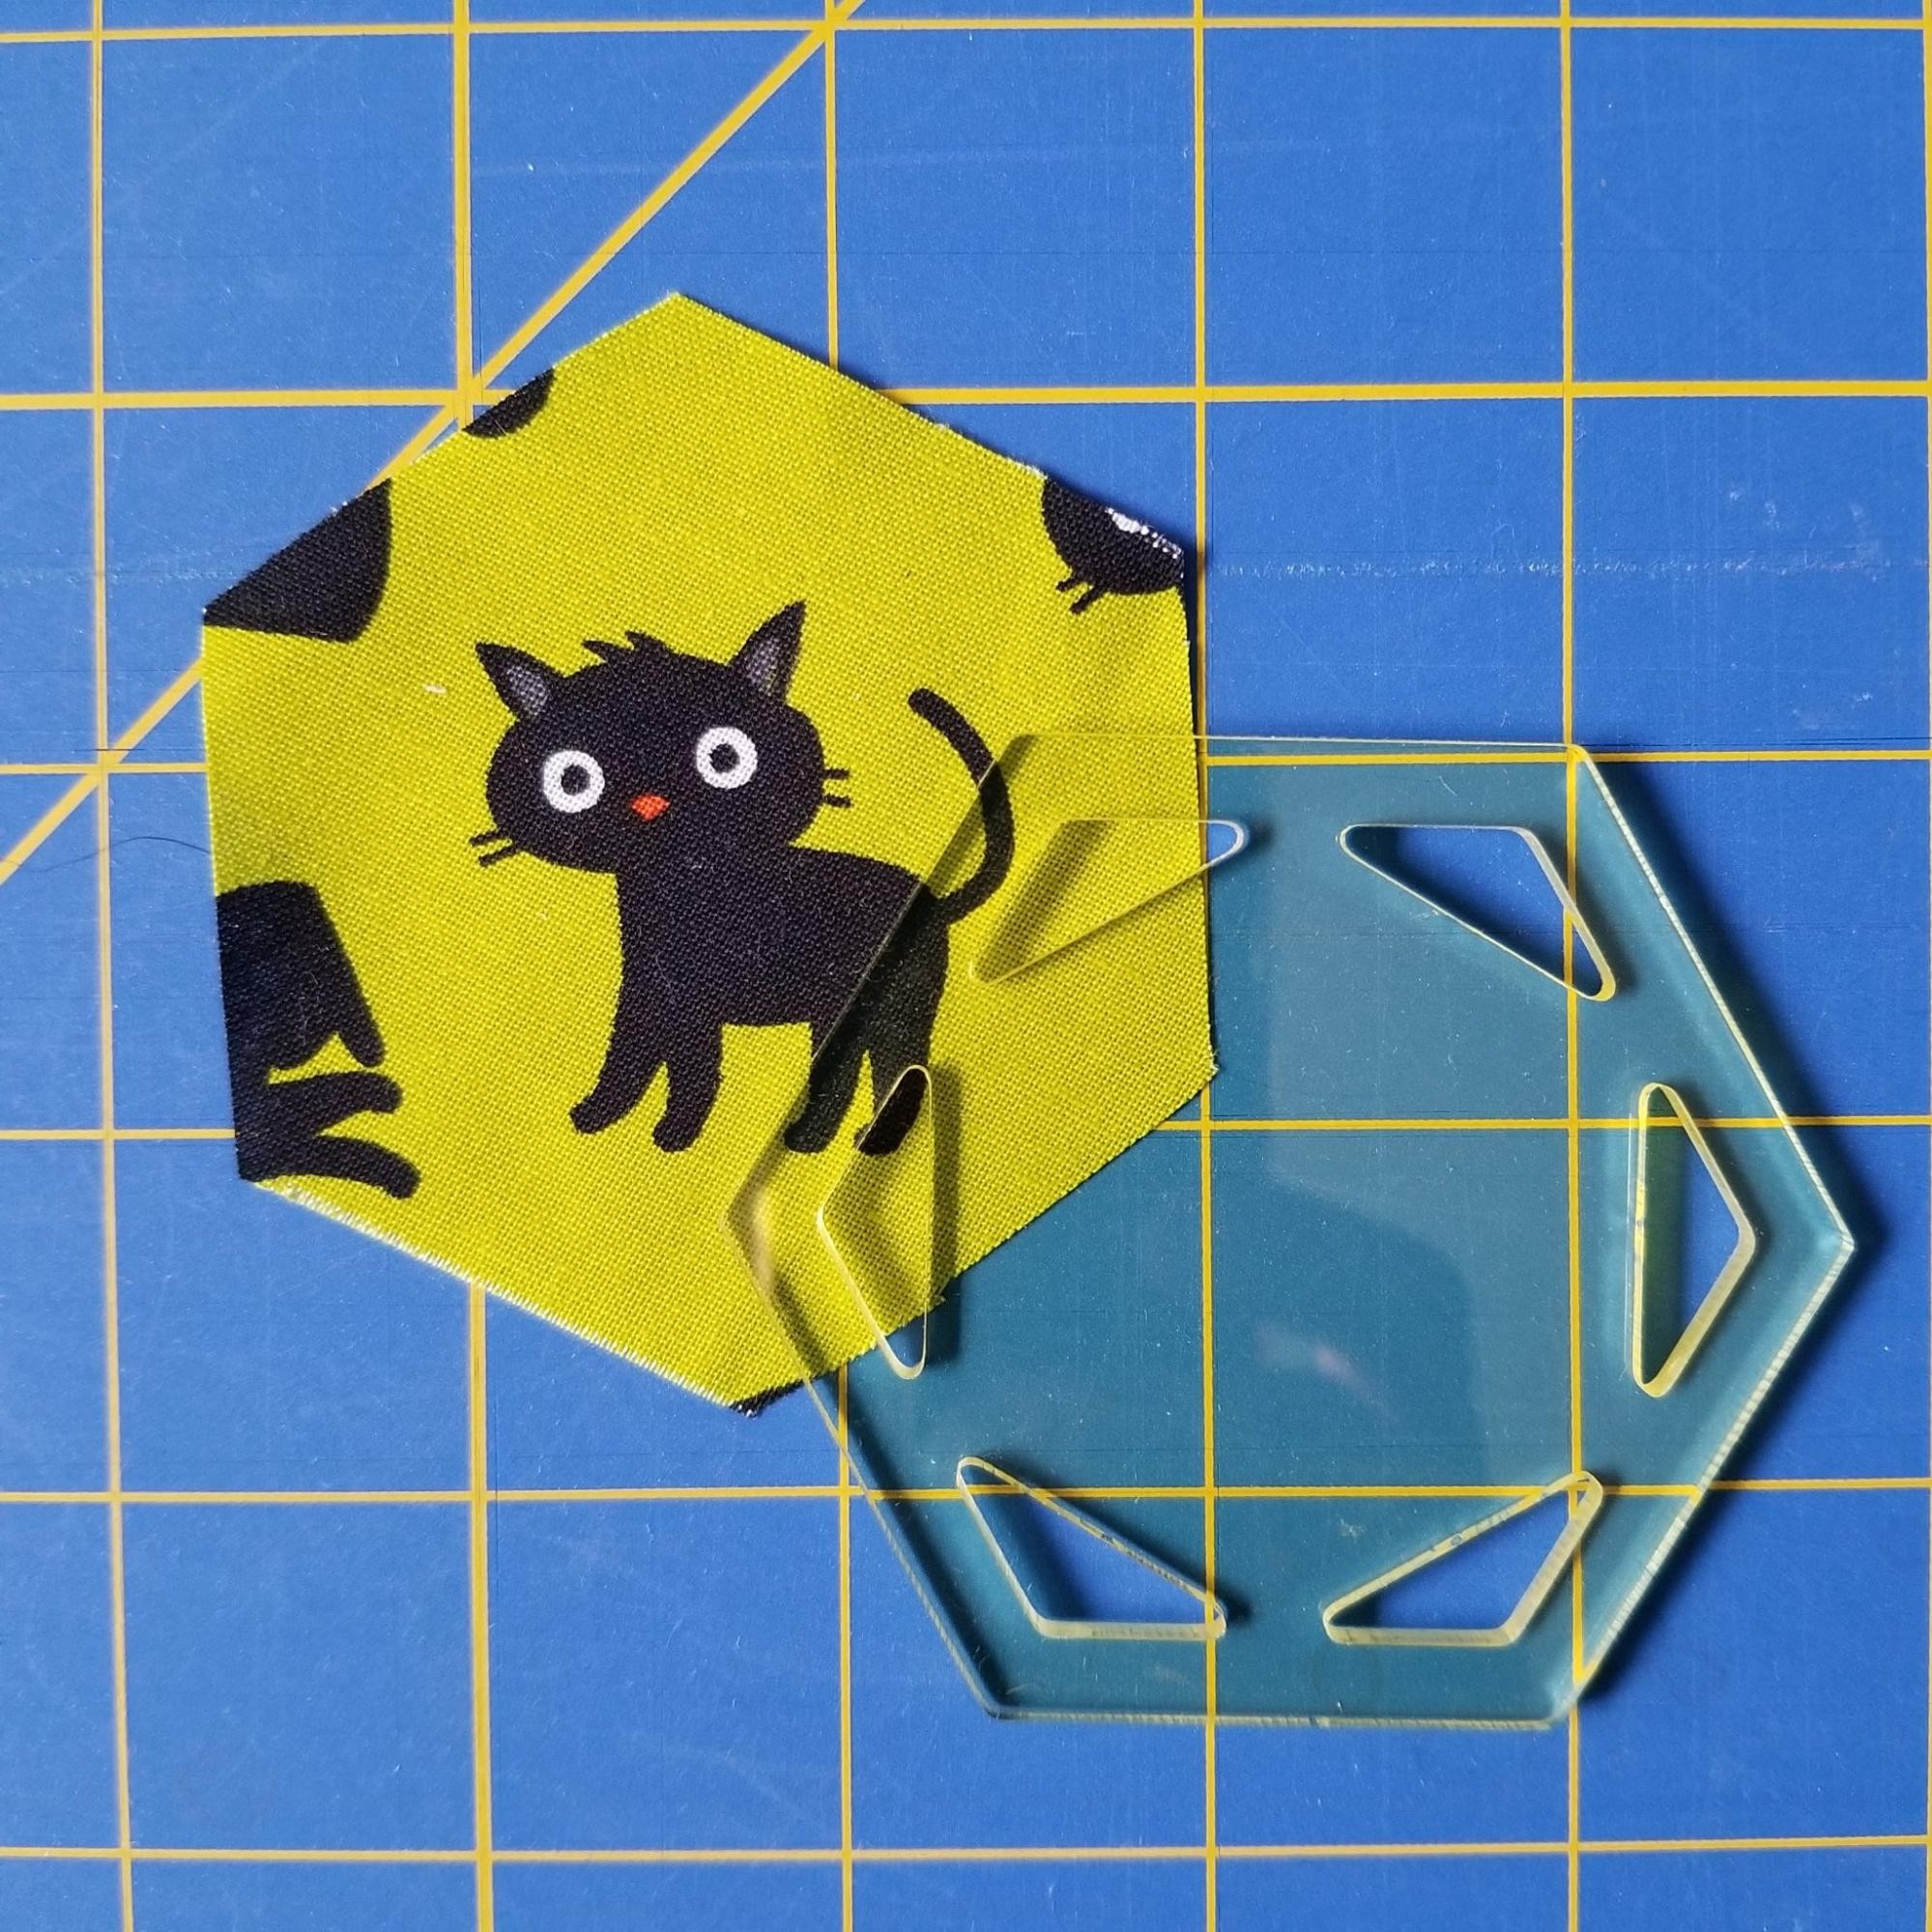 Showing a fussy cut, fabric hexagon that was made by using a hexagon quilt template.